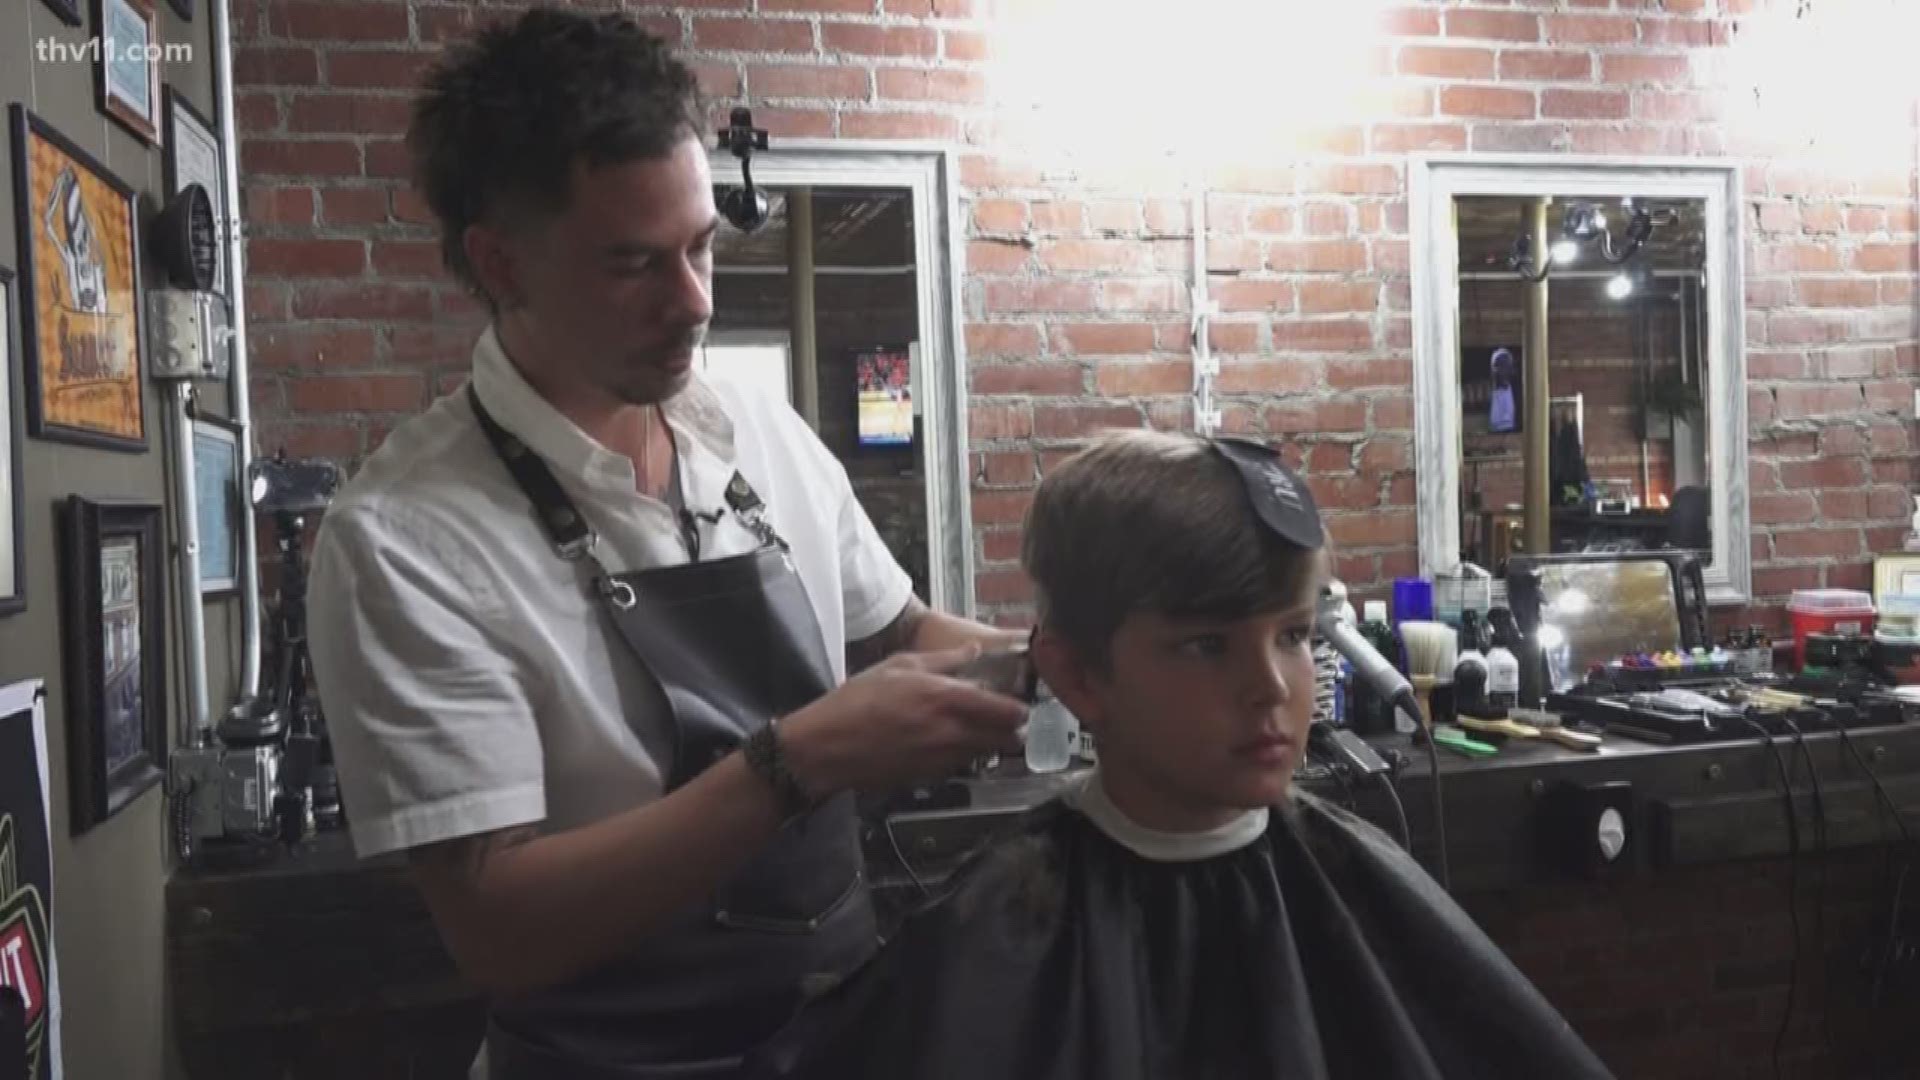 A Benton barber has made it his mission not only to give good cuts and styles, but to make men out of boys.